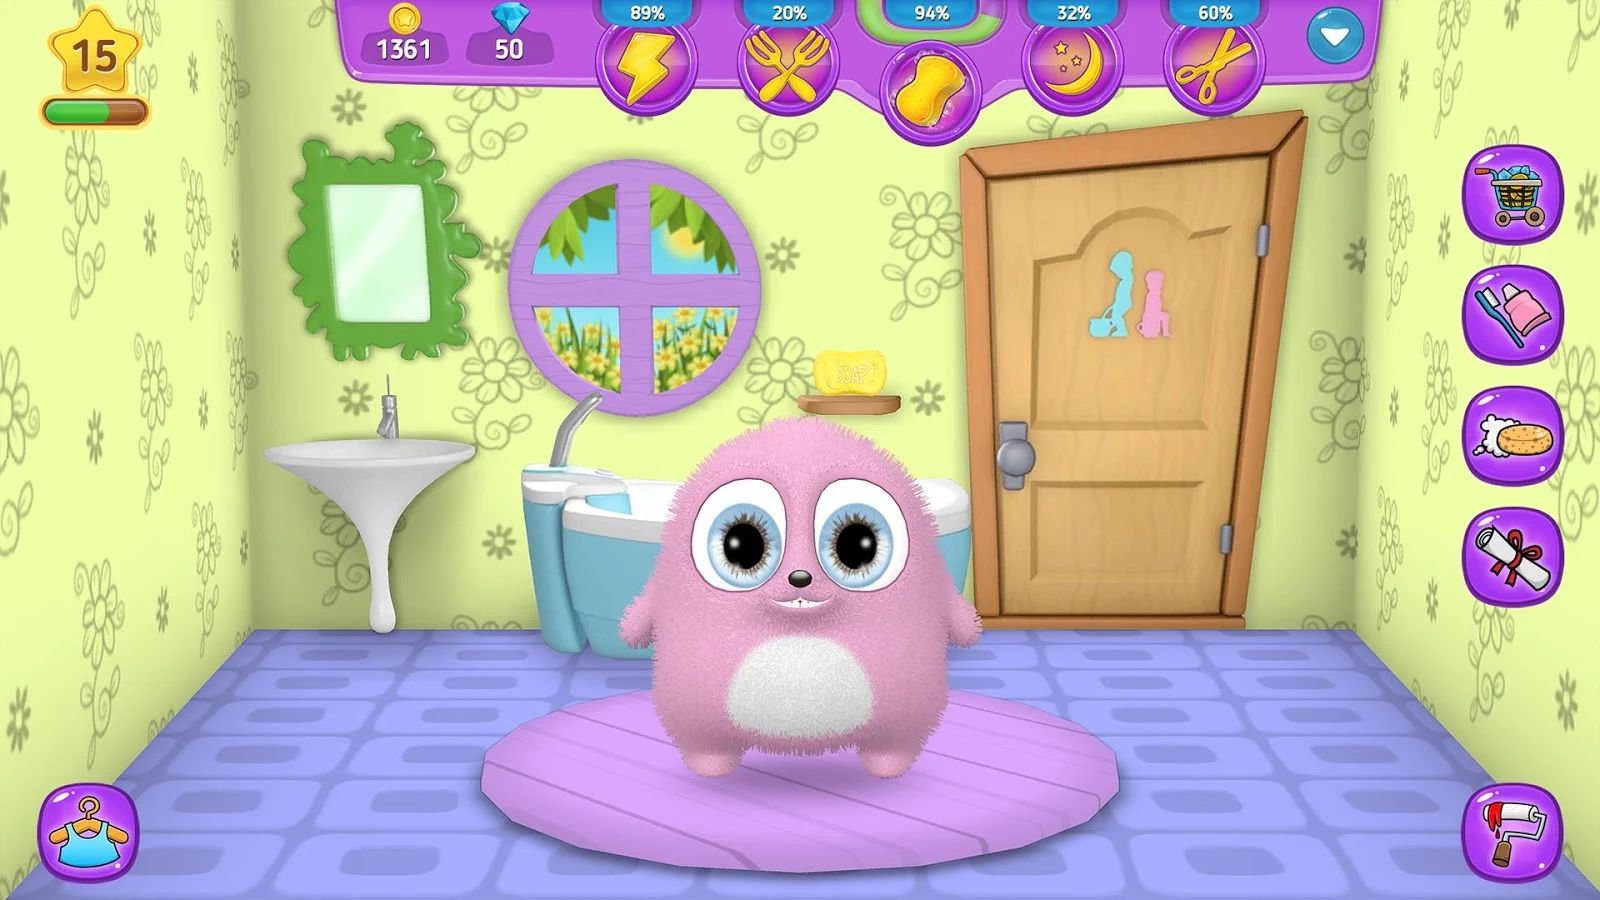 Pug - My Virtual Pet Dog APK for Android - Download